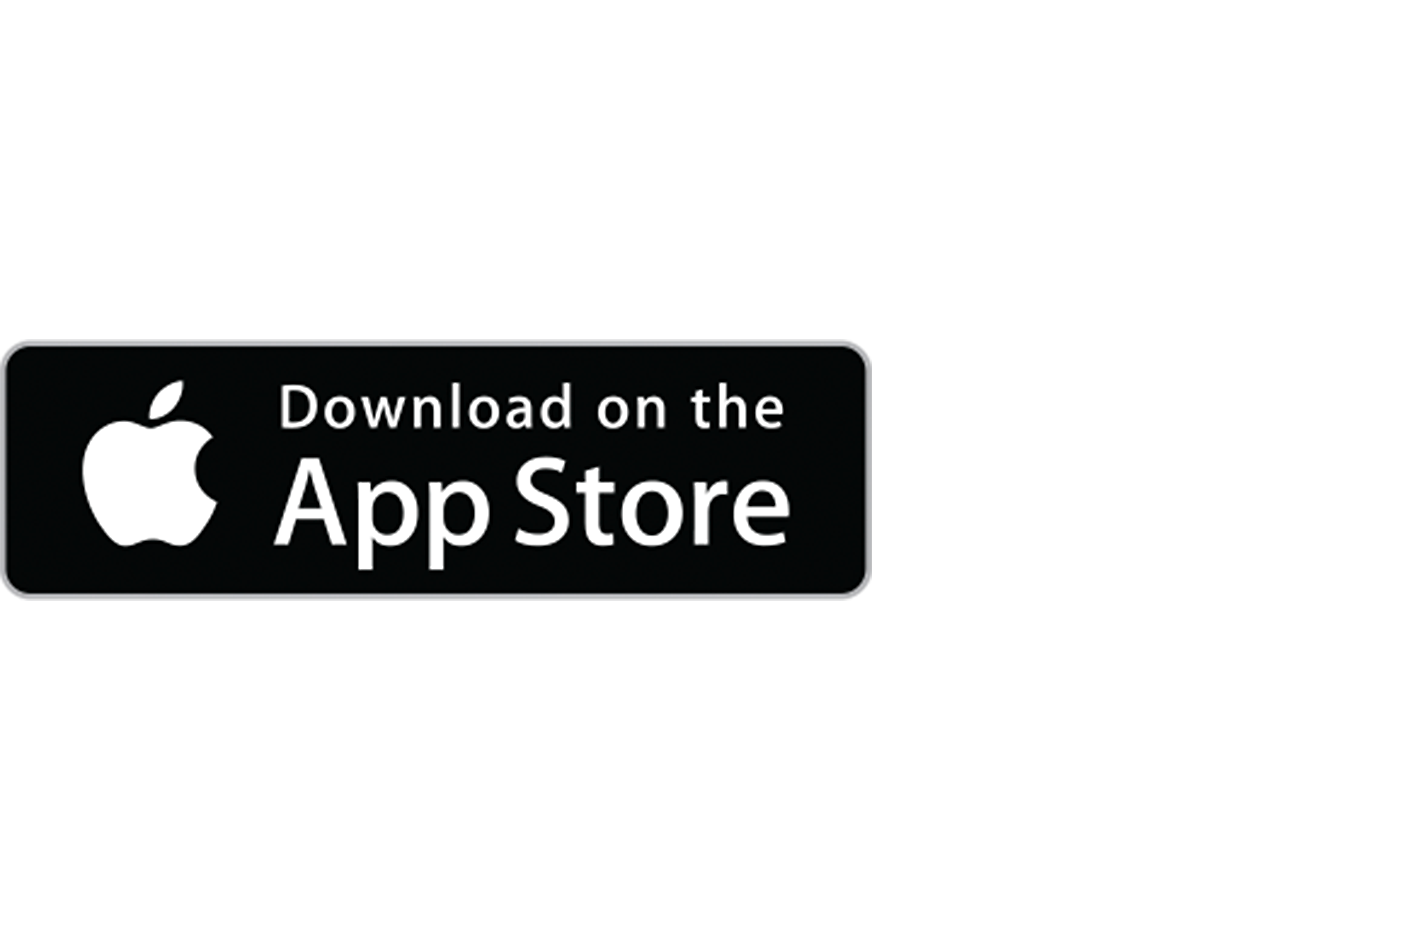 Image of the Apple App Store logo with the words "Download on the" the above